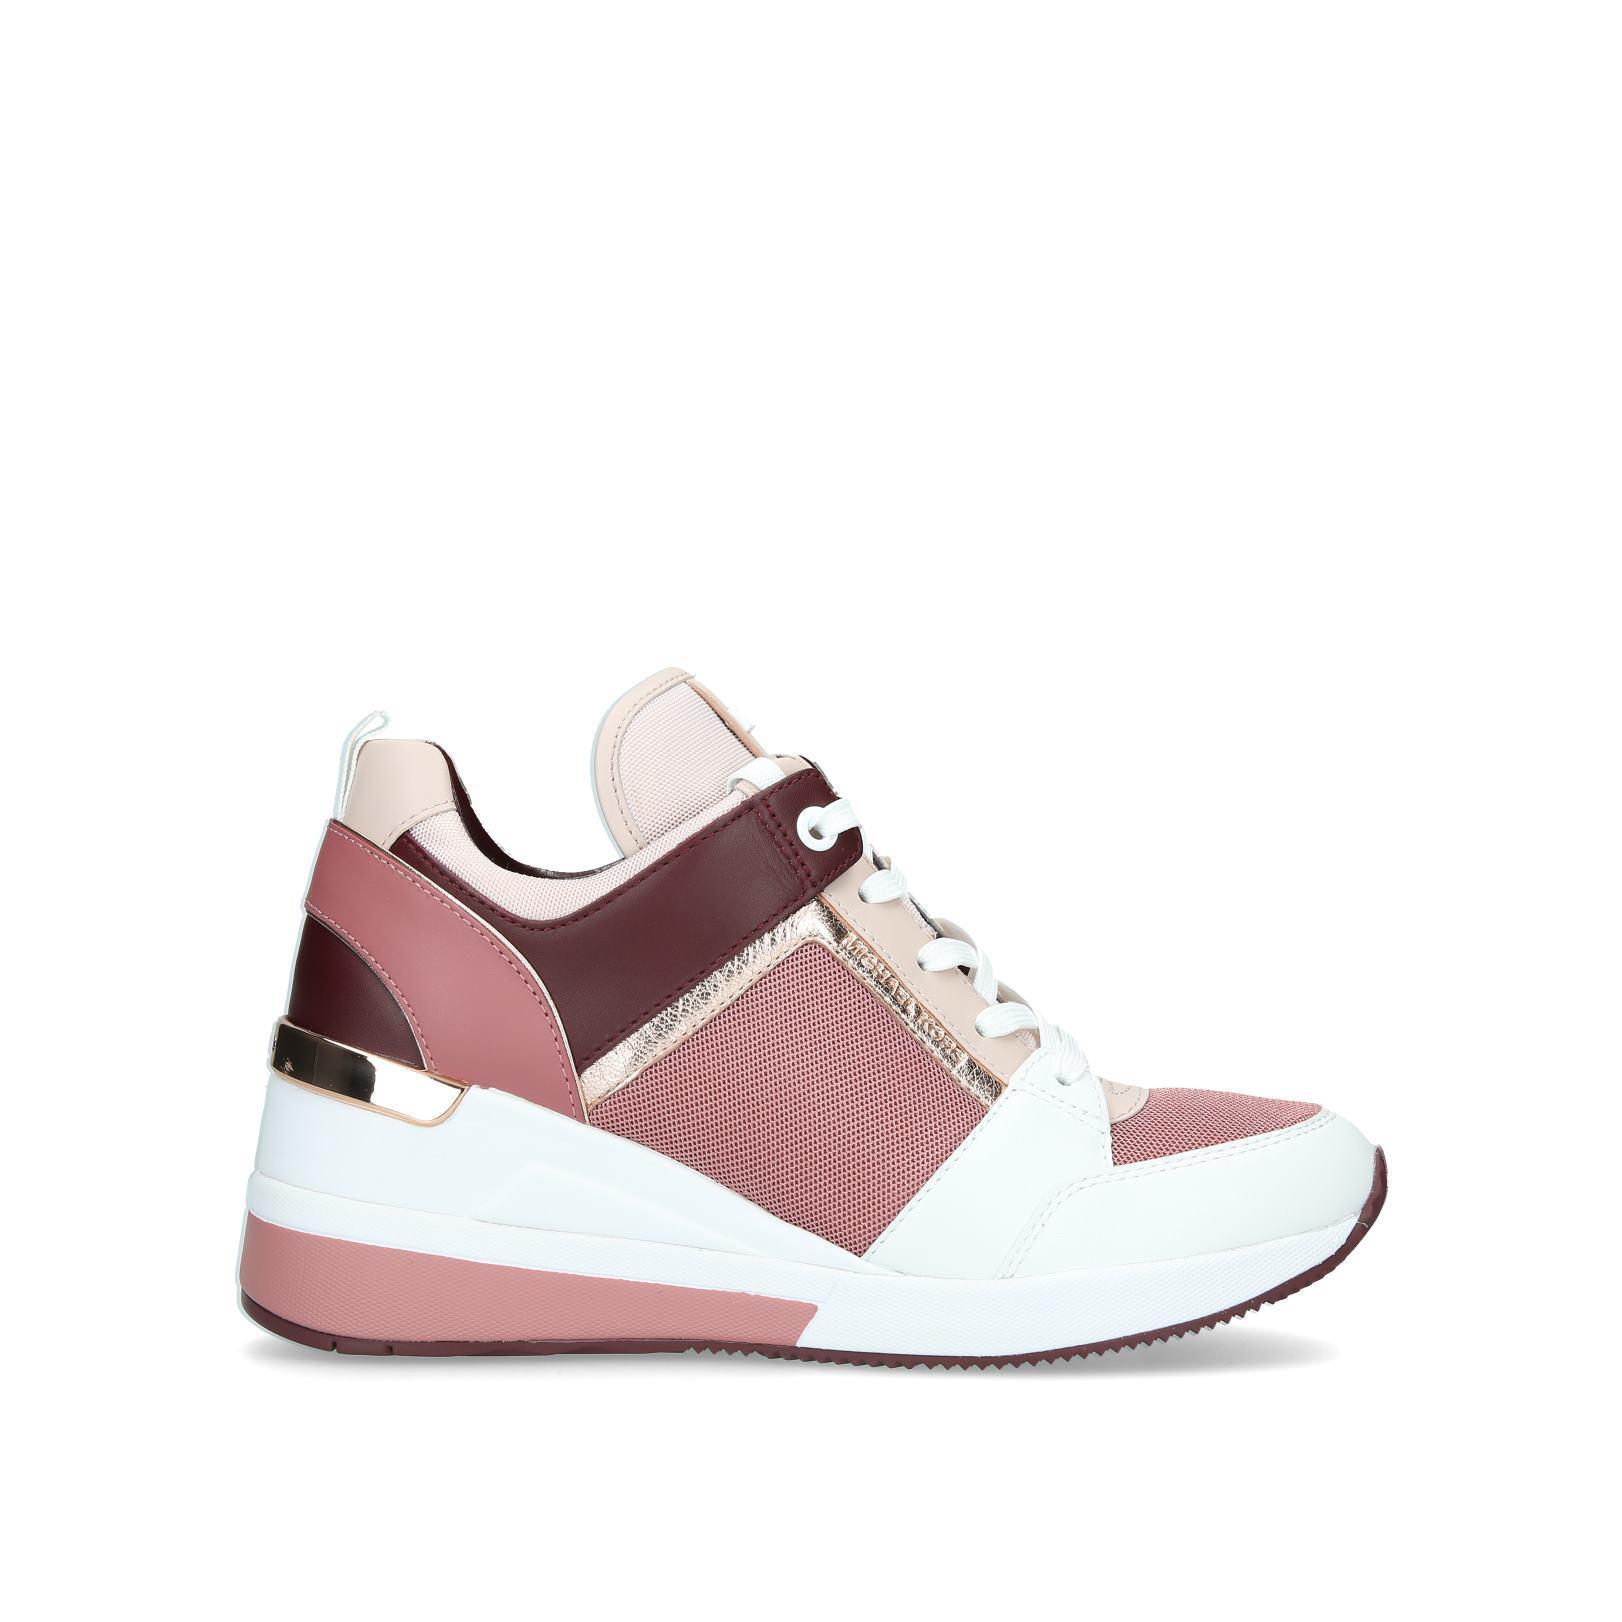 Michael Kors Billie Pink Leather  Suede Lace Up Trainer